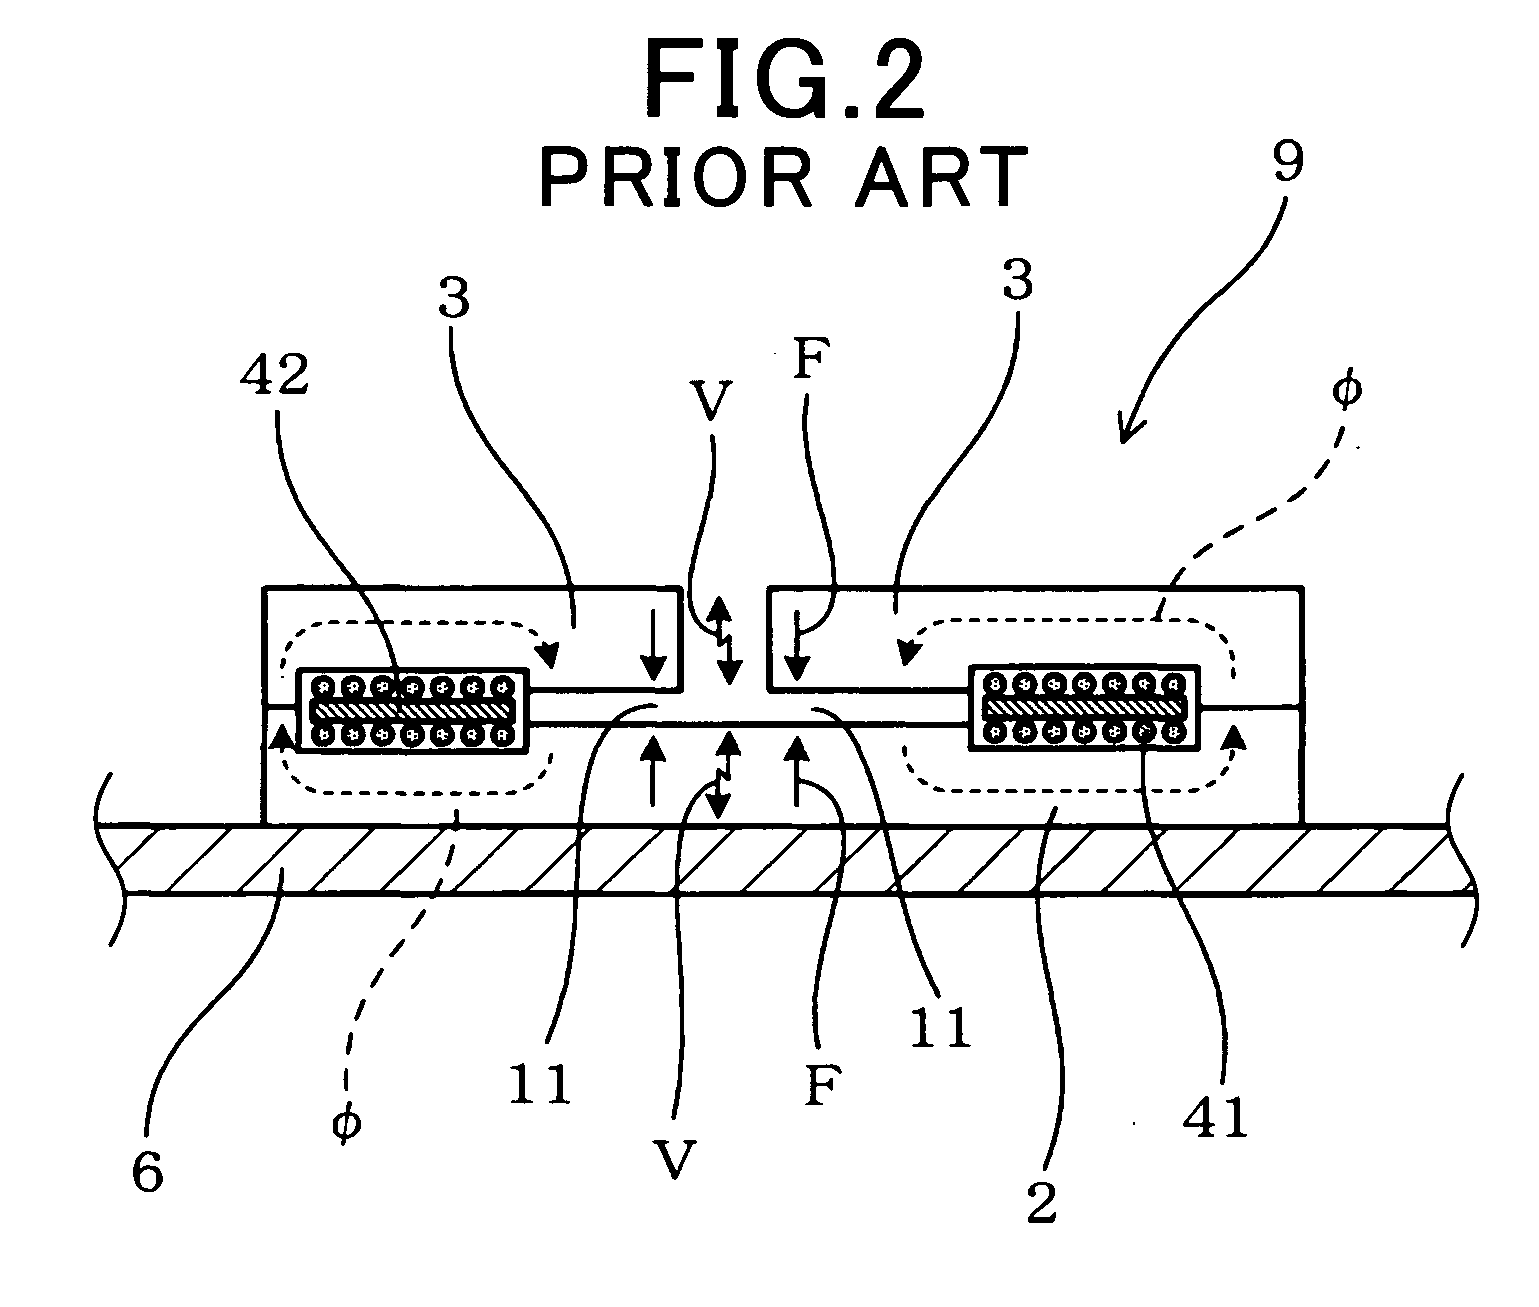 Transformer incorporated in electronic circuits